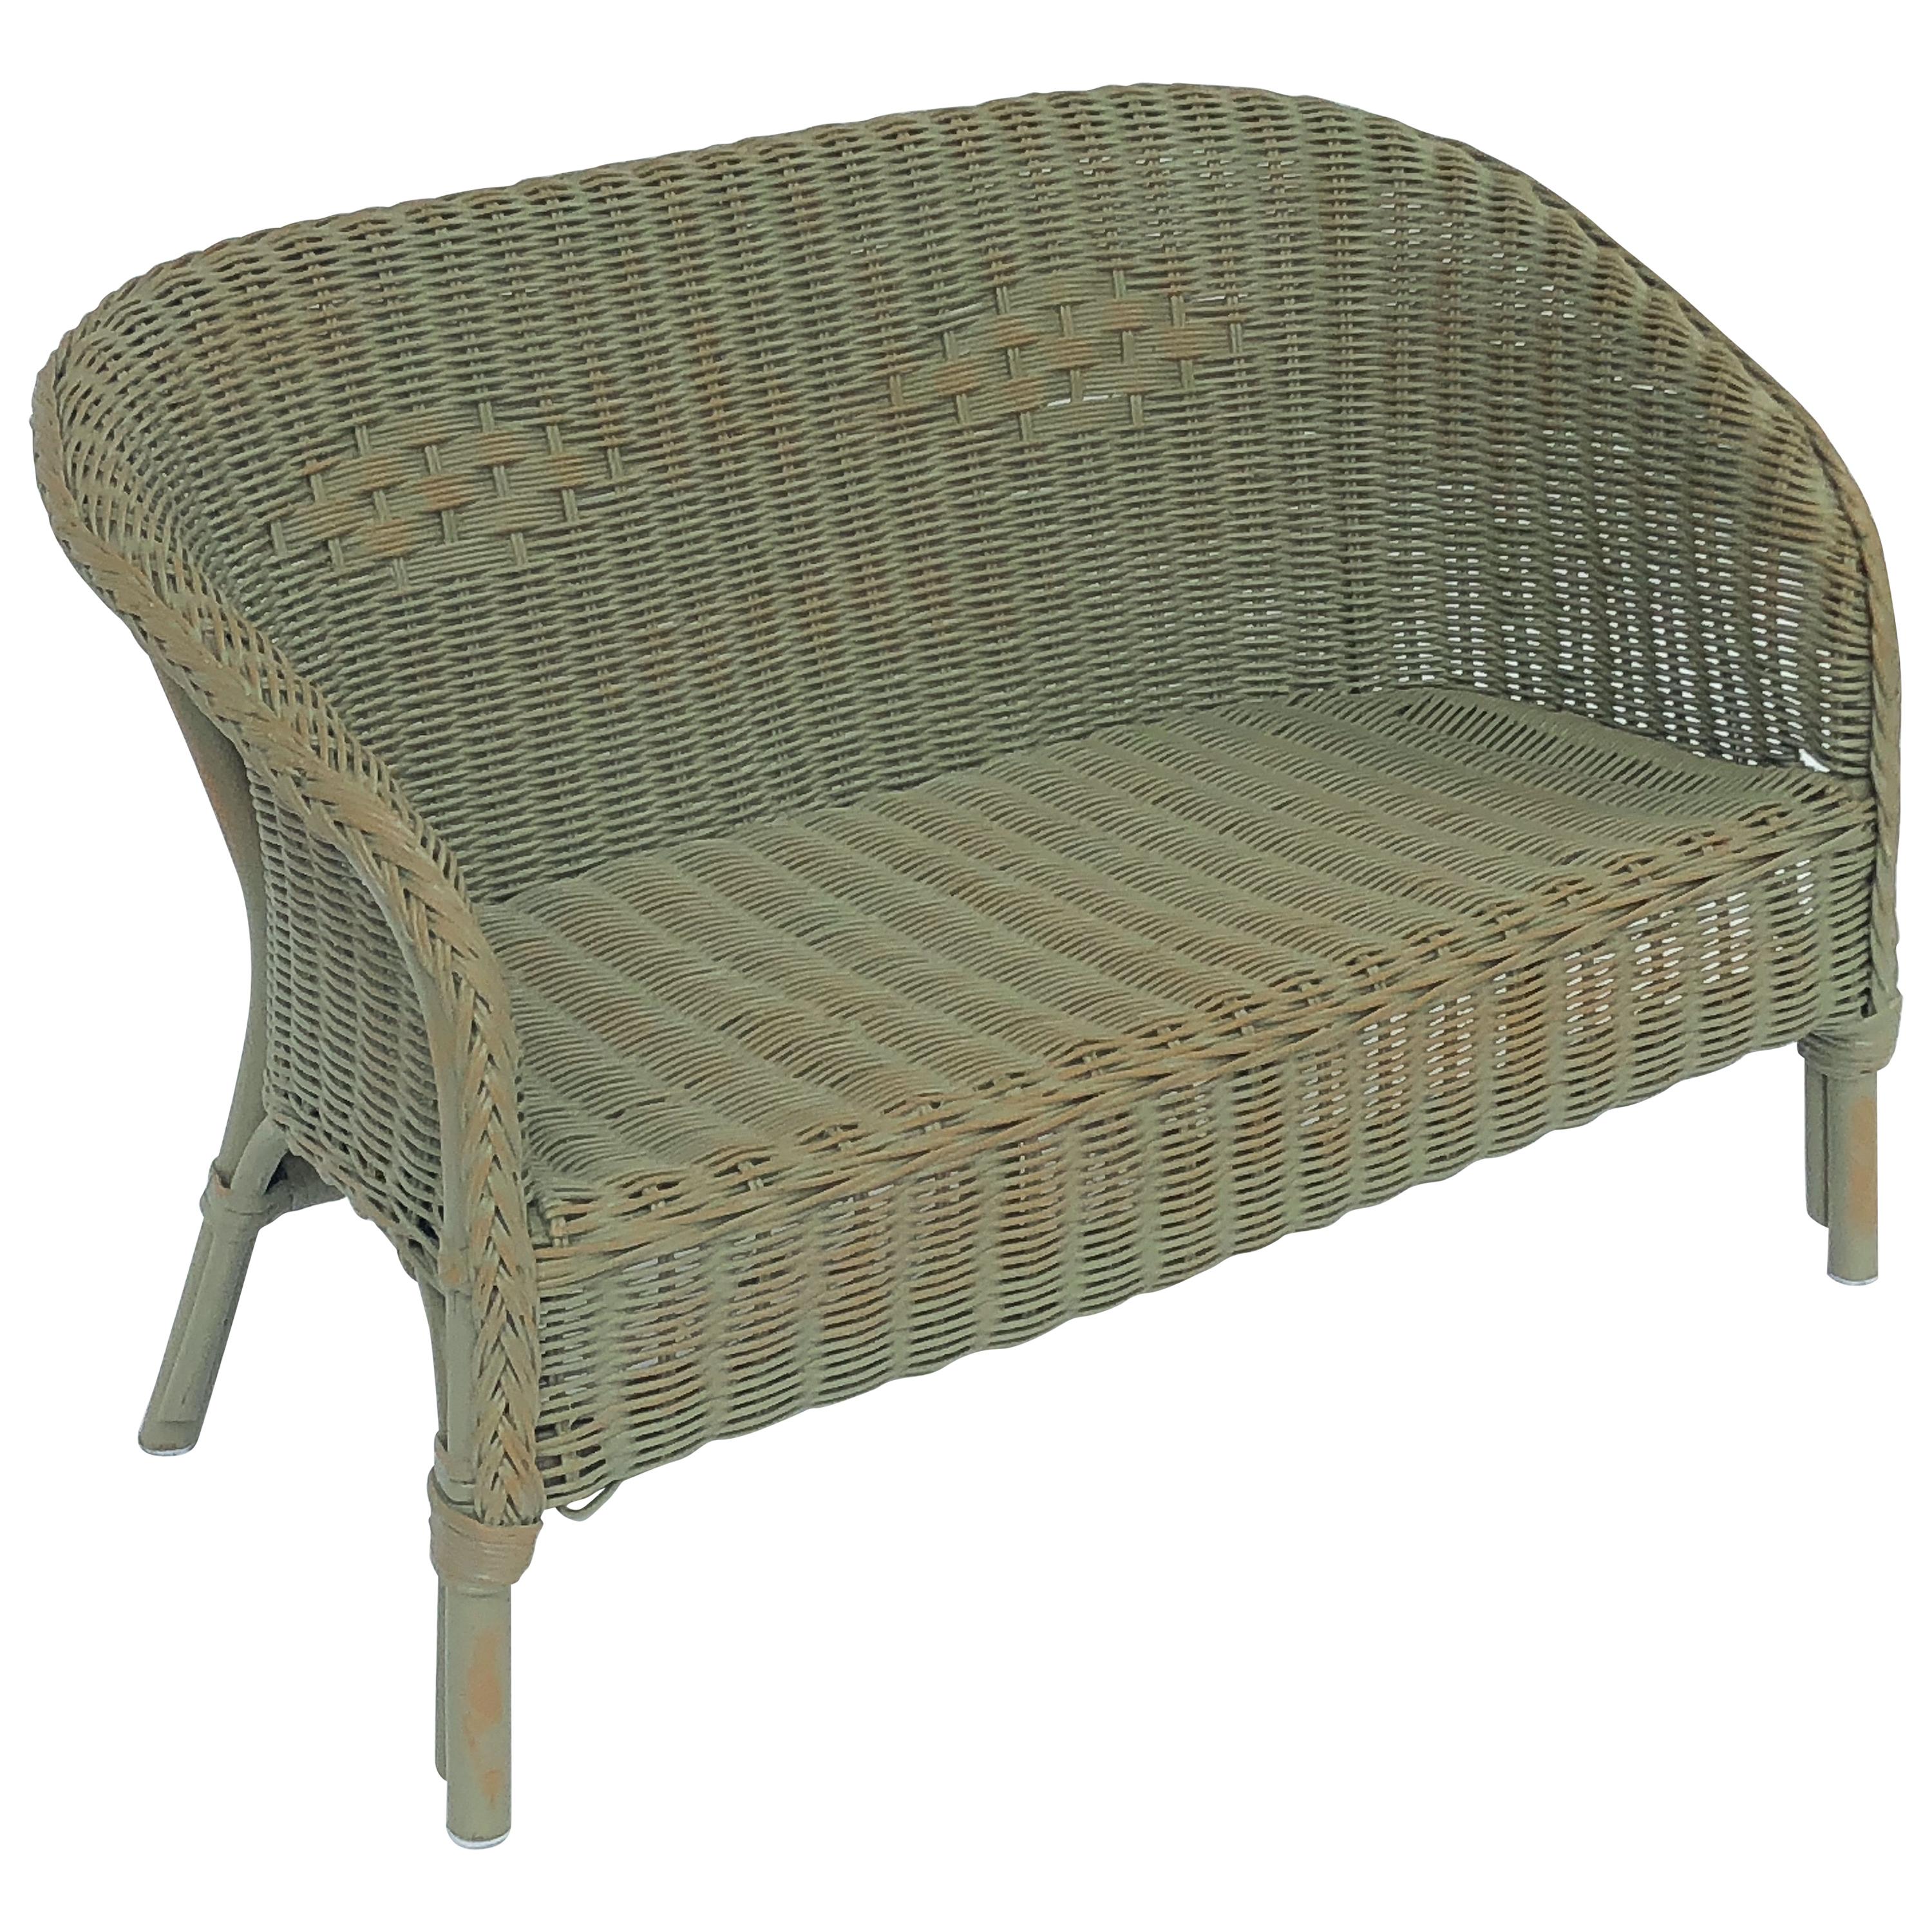 English Wicker Garden Child's Settee Bench or Seat by Lloyd Loom